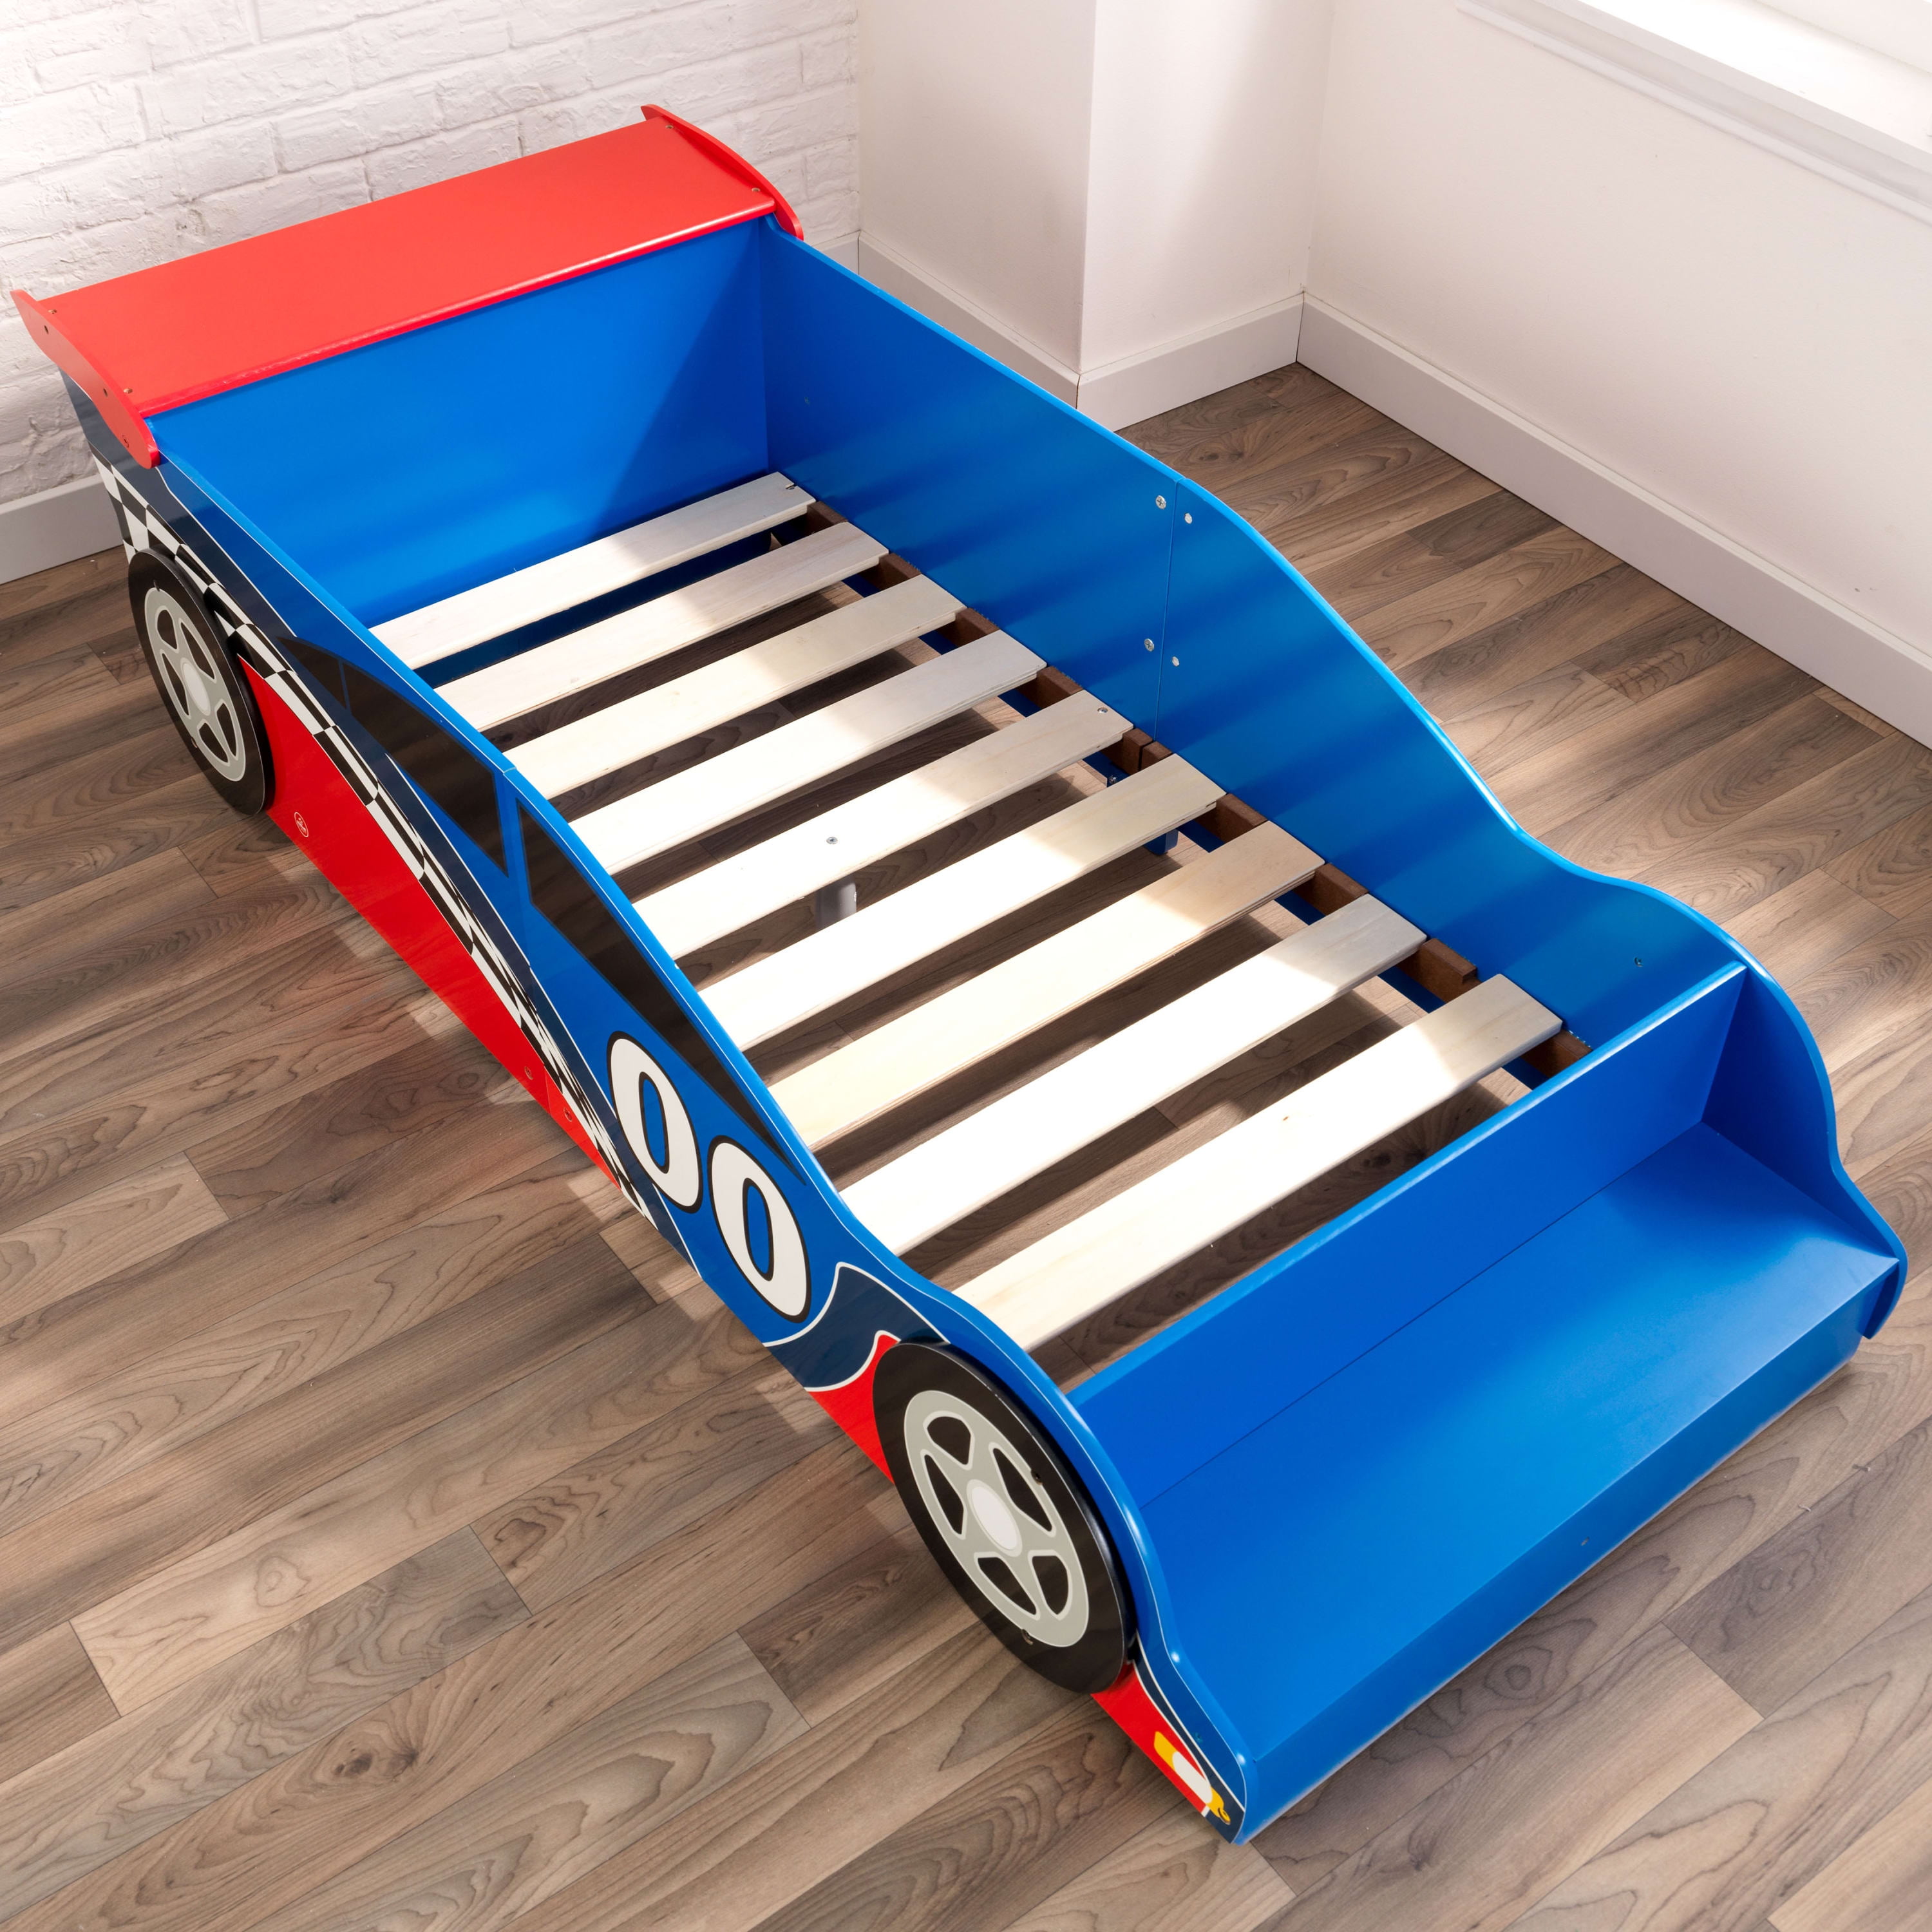 Blue KidKraft Racecar Low to Ground Sturdy Kids and Toddler Bed with Bench 